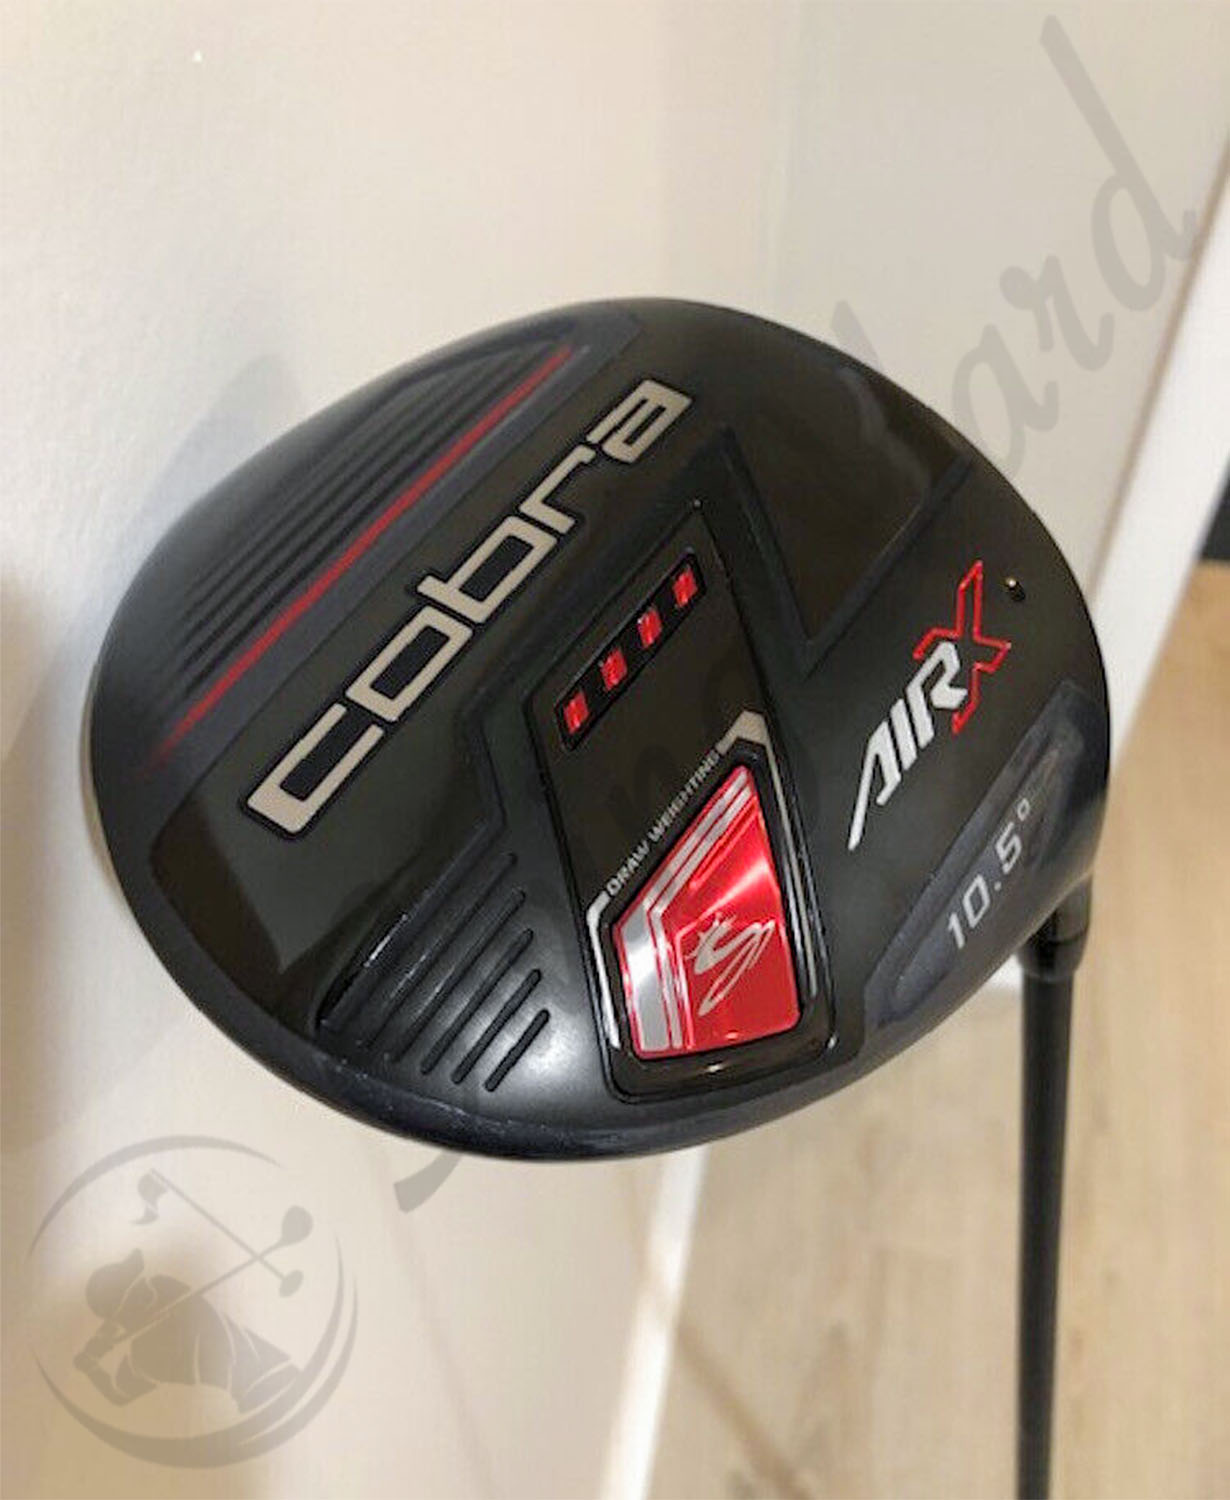 The Cobra Air X Offset driver up close and personal